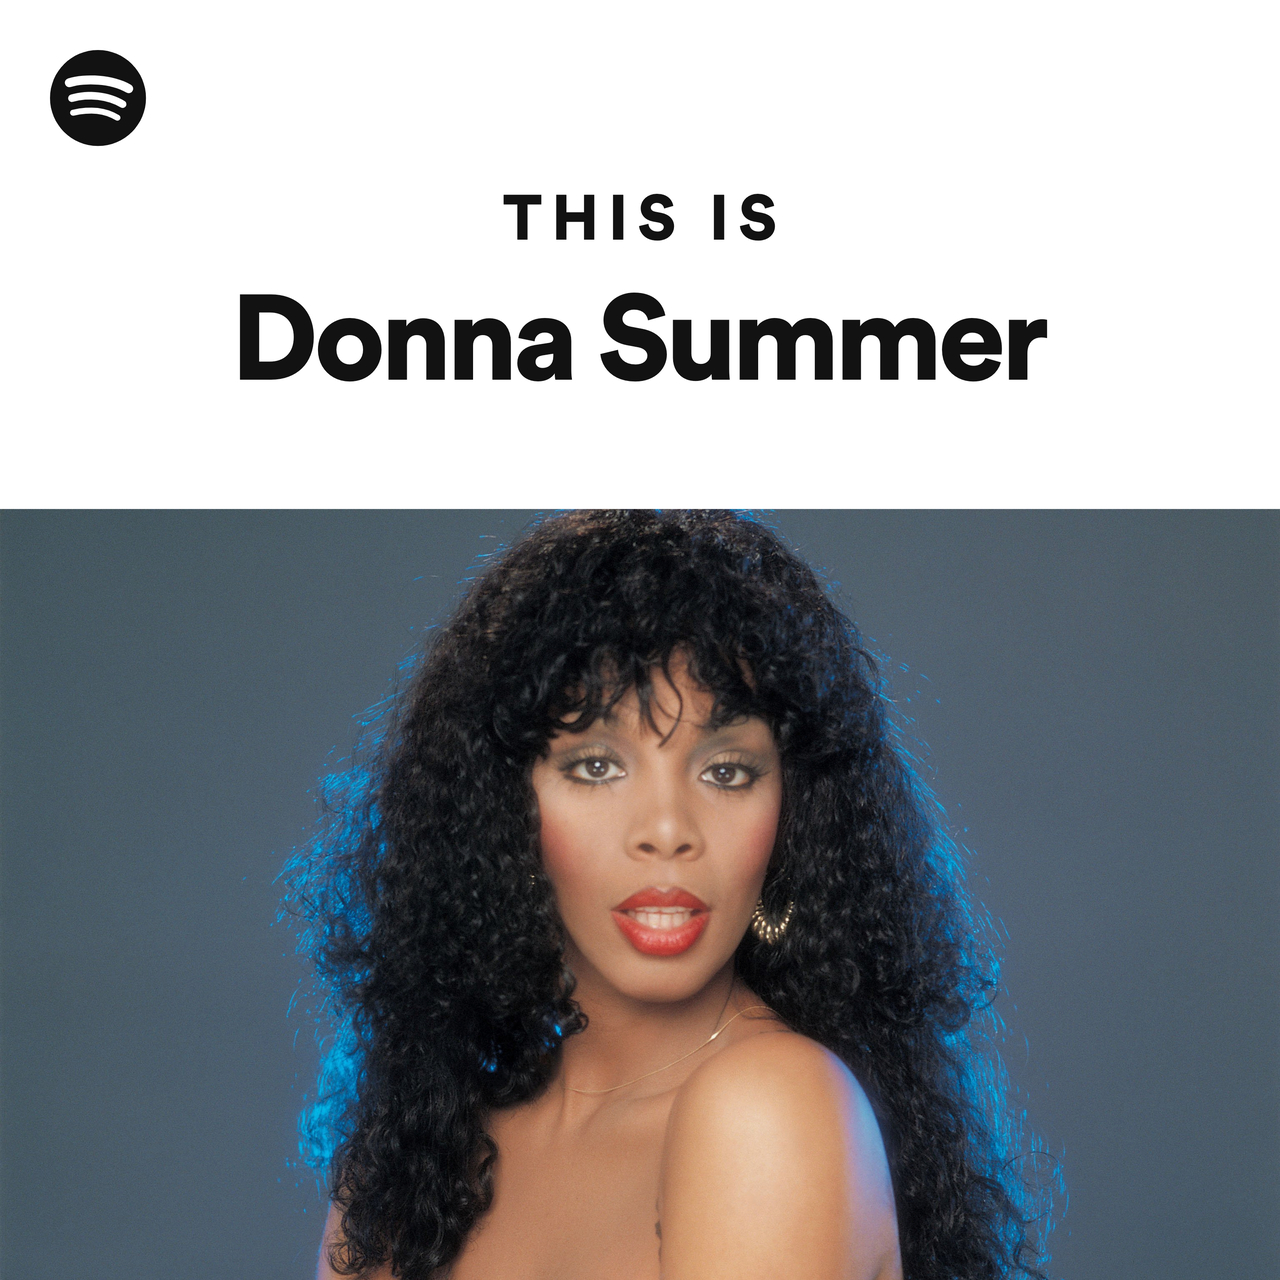 Donna Summer's best songs for a weekend dance party